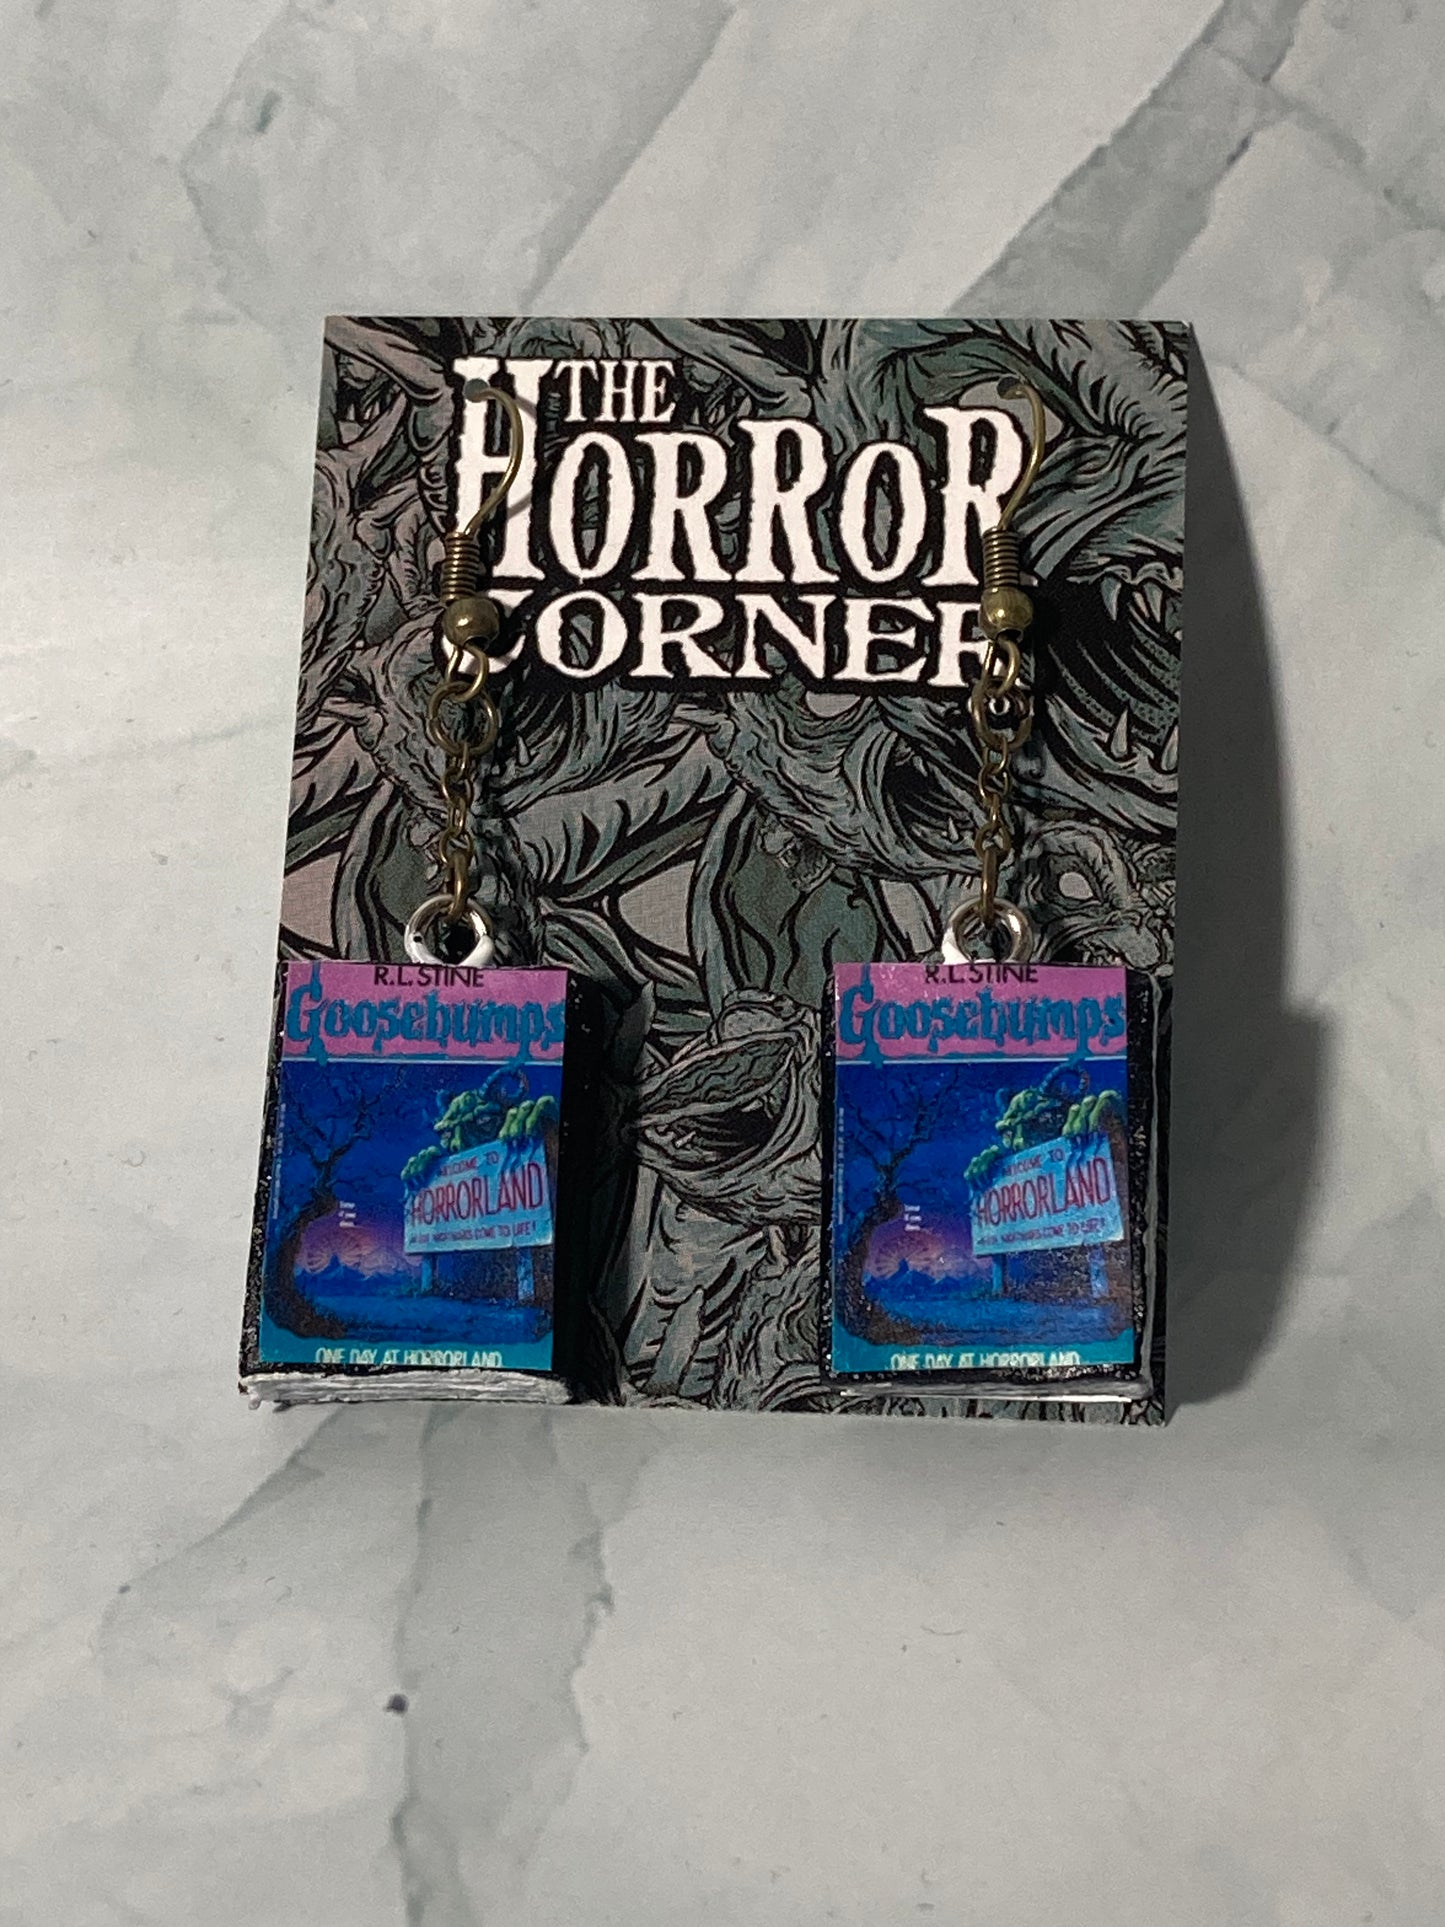 Goosebumps: Welcome to Horror Land book earrings